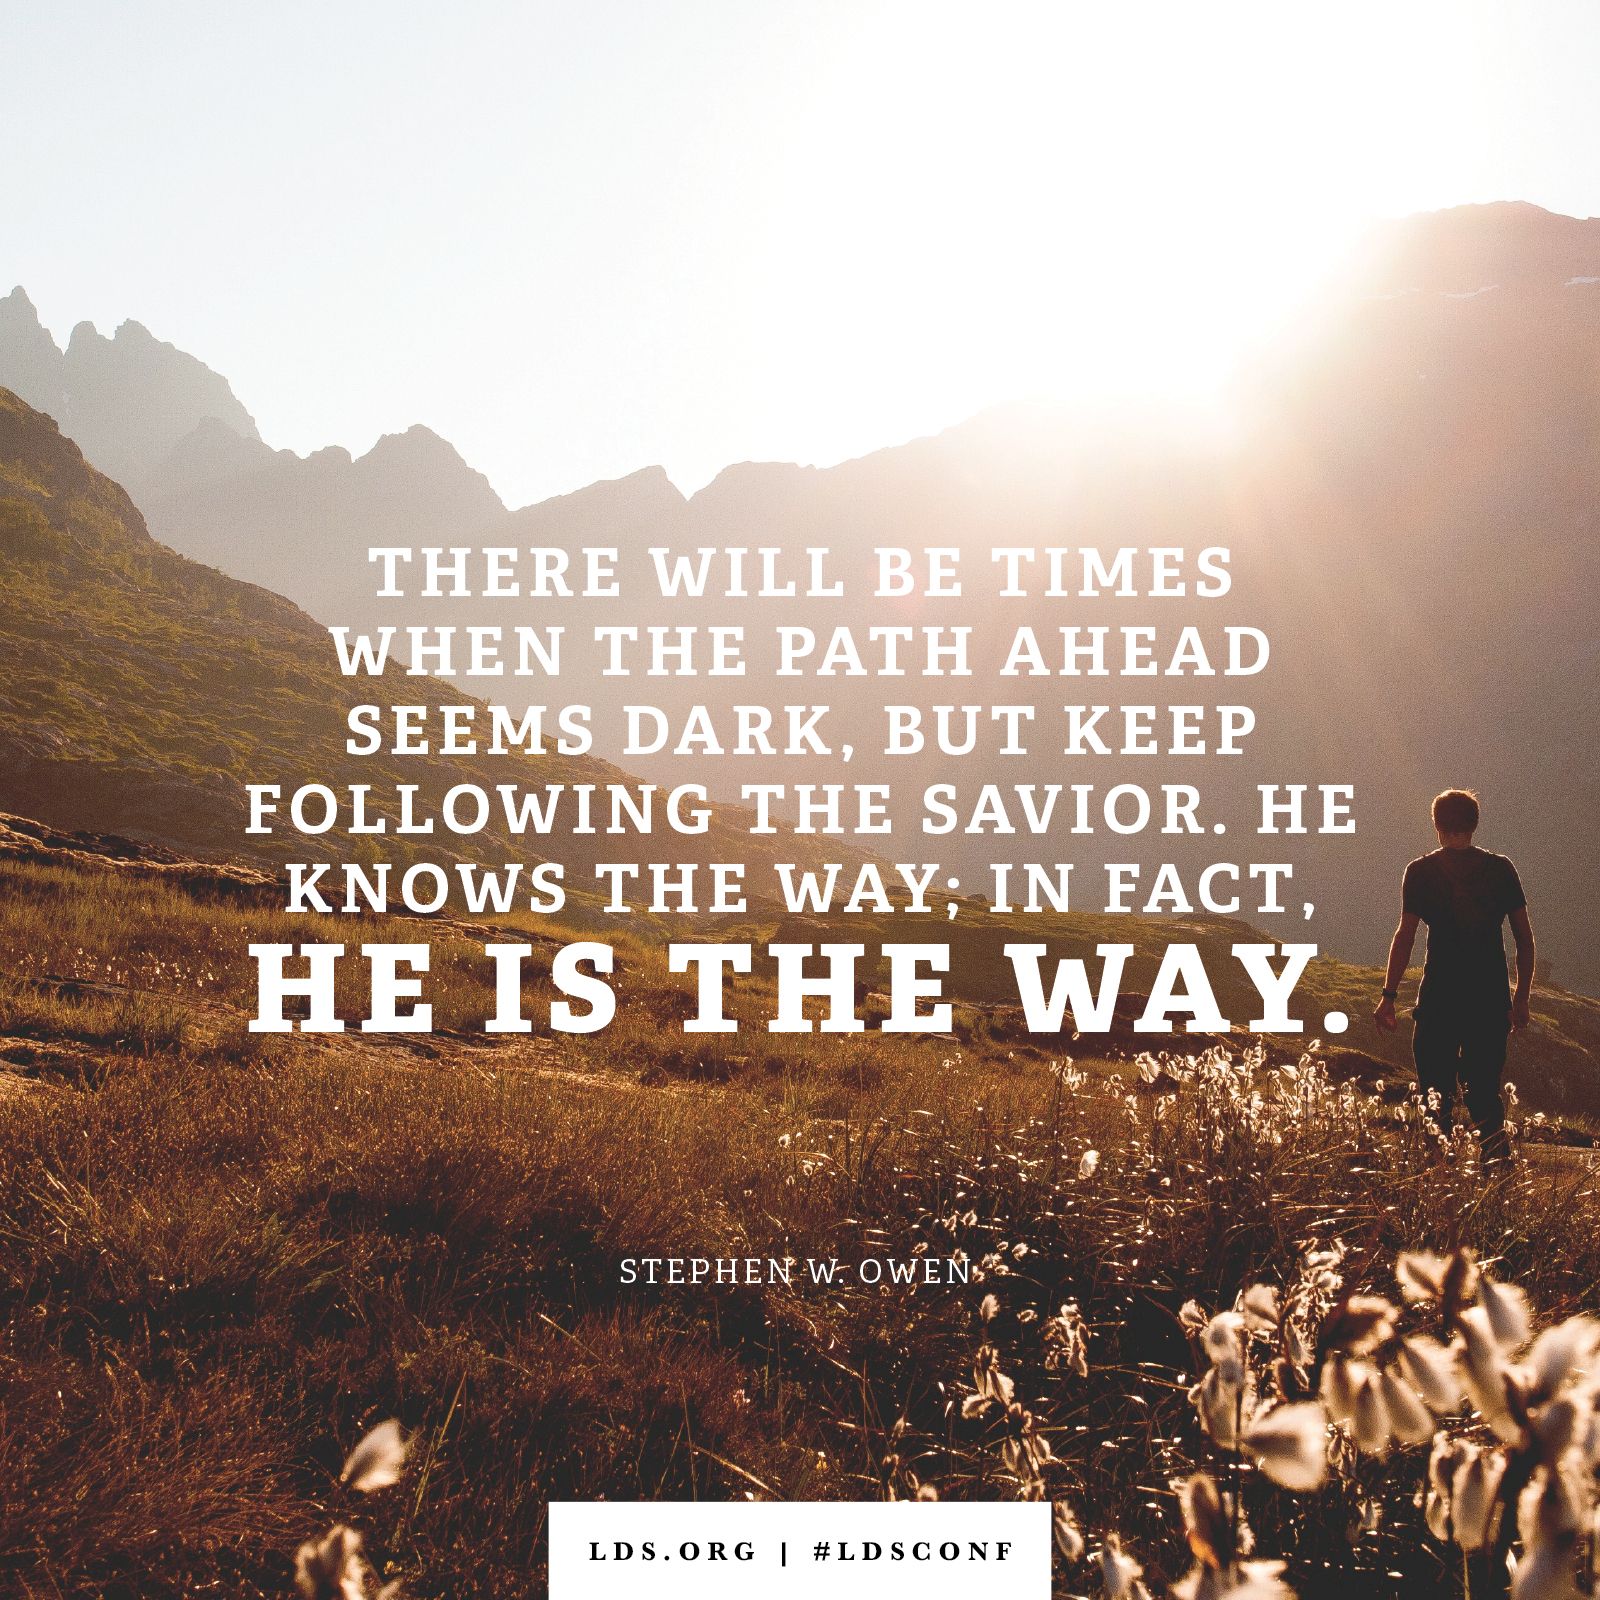 “There will be times when the path ahead seems dark, but keep following the Savior. He knows the way; in fact, He is the way.” —Brother Stephen W. Owen, “The Greatest Leaders Are the Greatest Followers”